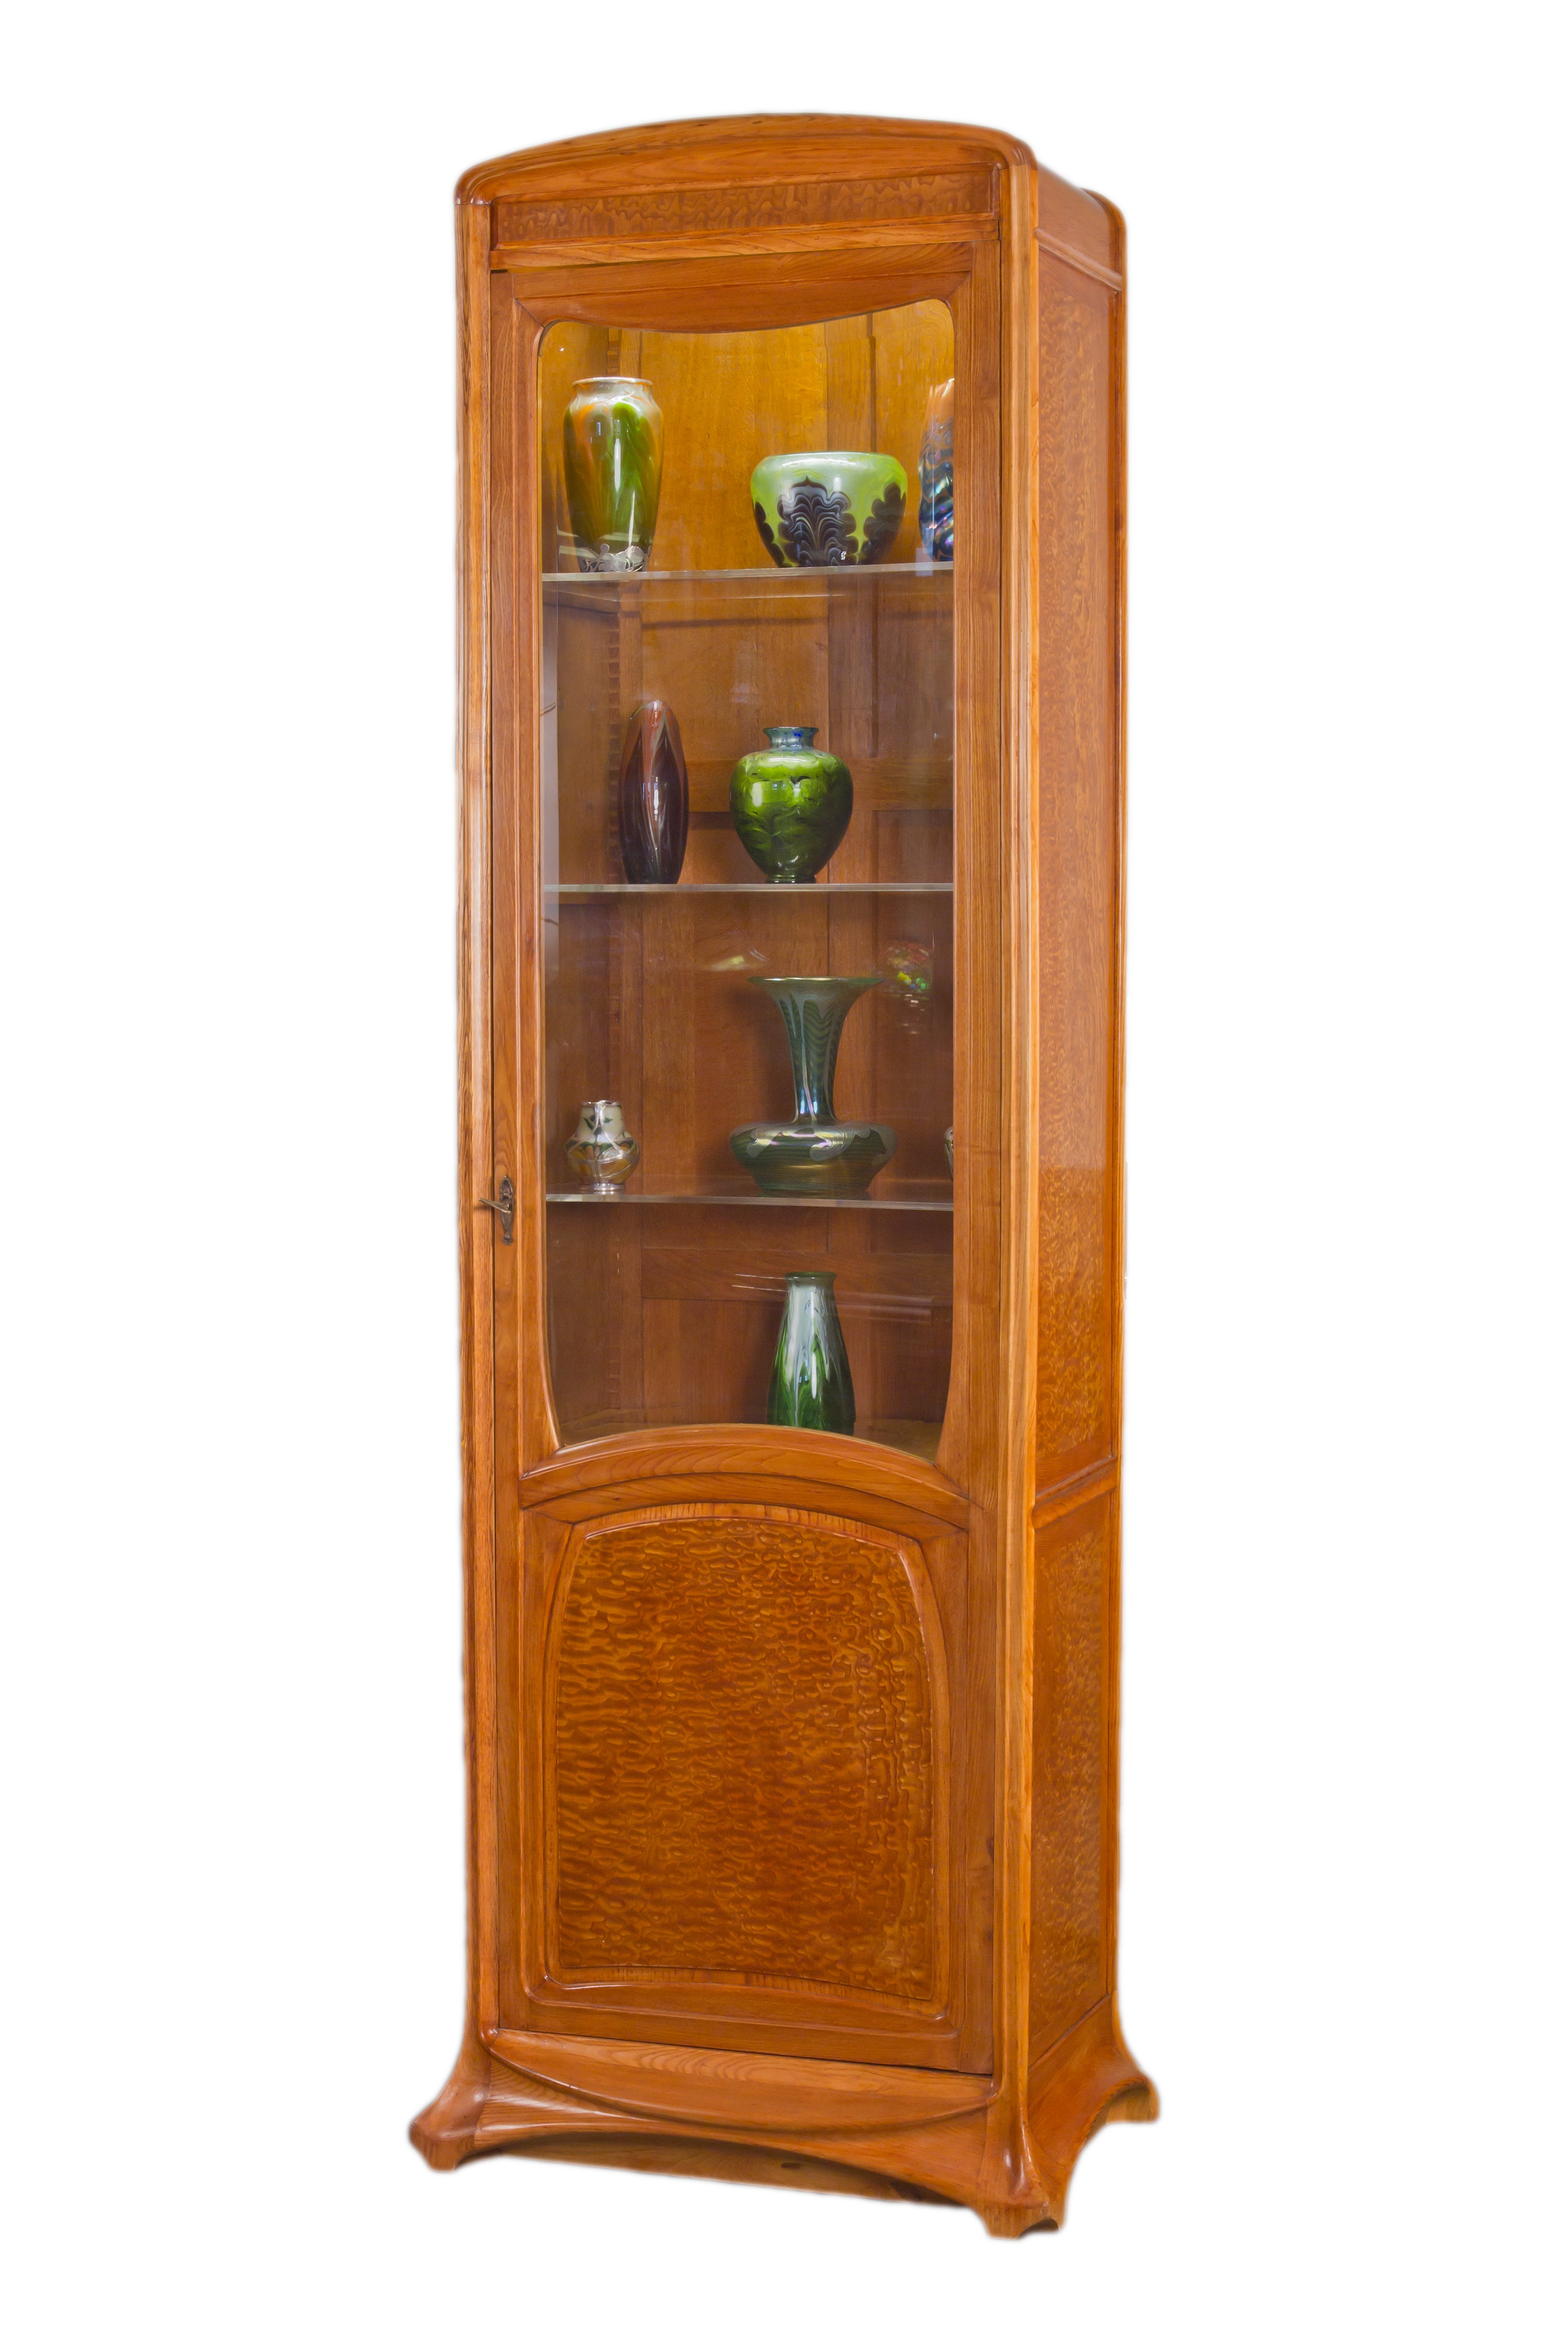 A Pair of Art Nouveau Carved Wood Display Cabinets by, Louis Majorelle